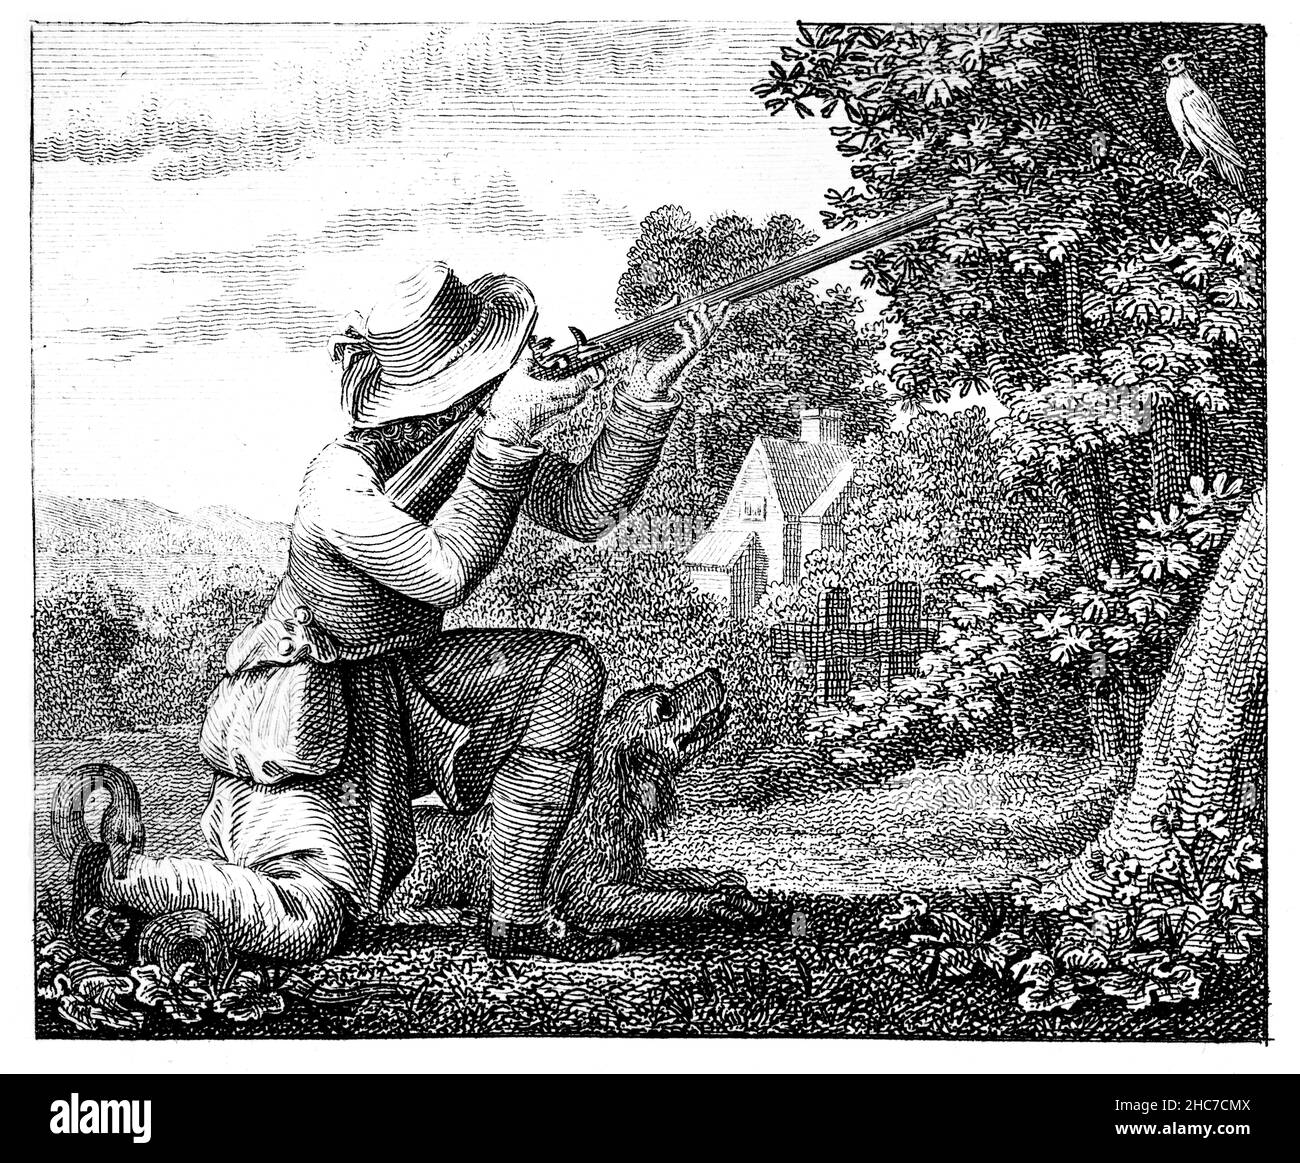 engraved illustration of The Fowler and the Ringdove, a tale of falling into a trap prepared for others, from 1793 First Edition of Stockdale’s Aesop’ Stock Photo